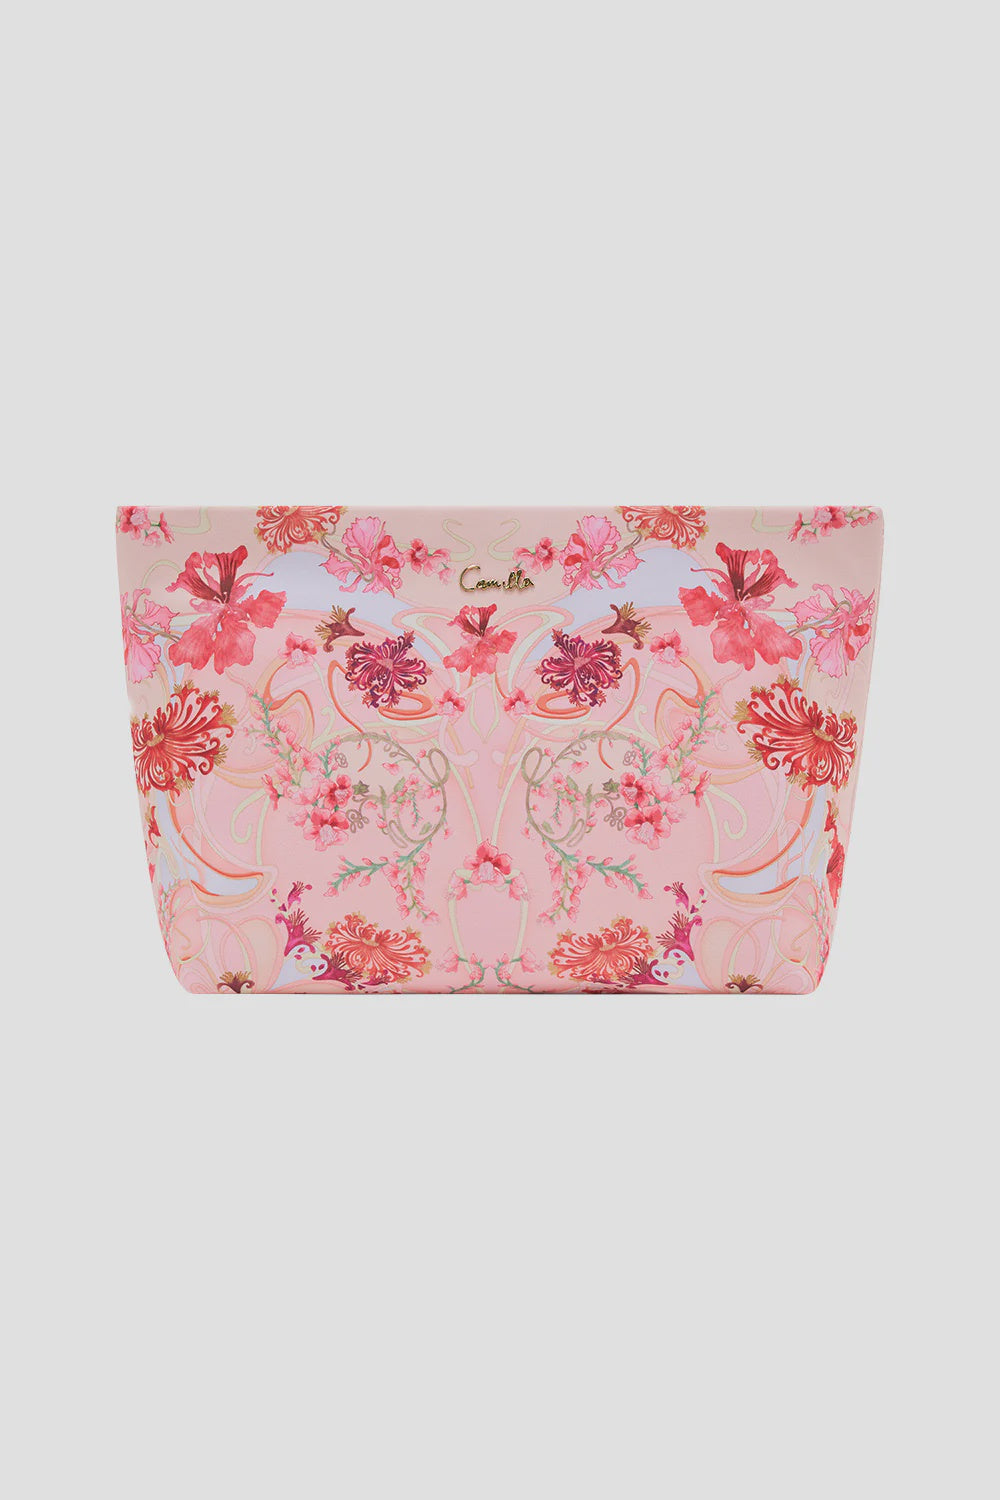 Large Makeup Clutch - Blossoms and Brushstrokes